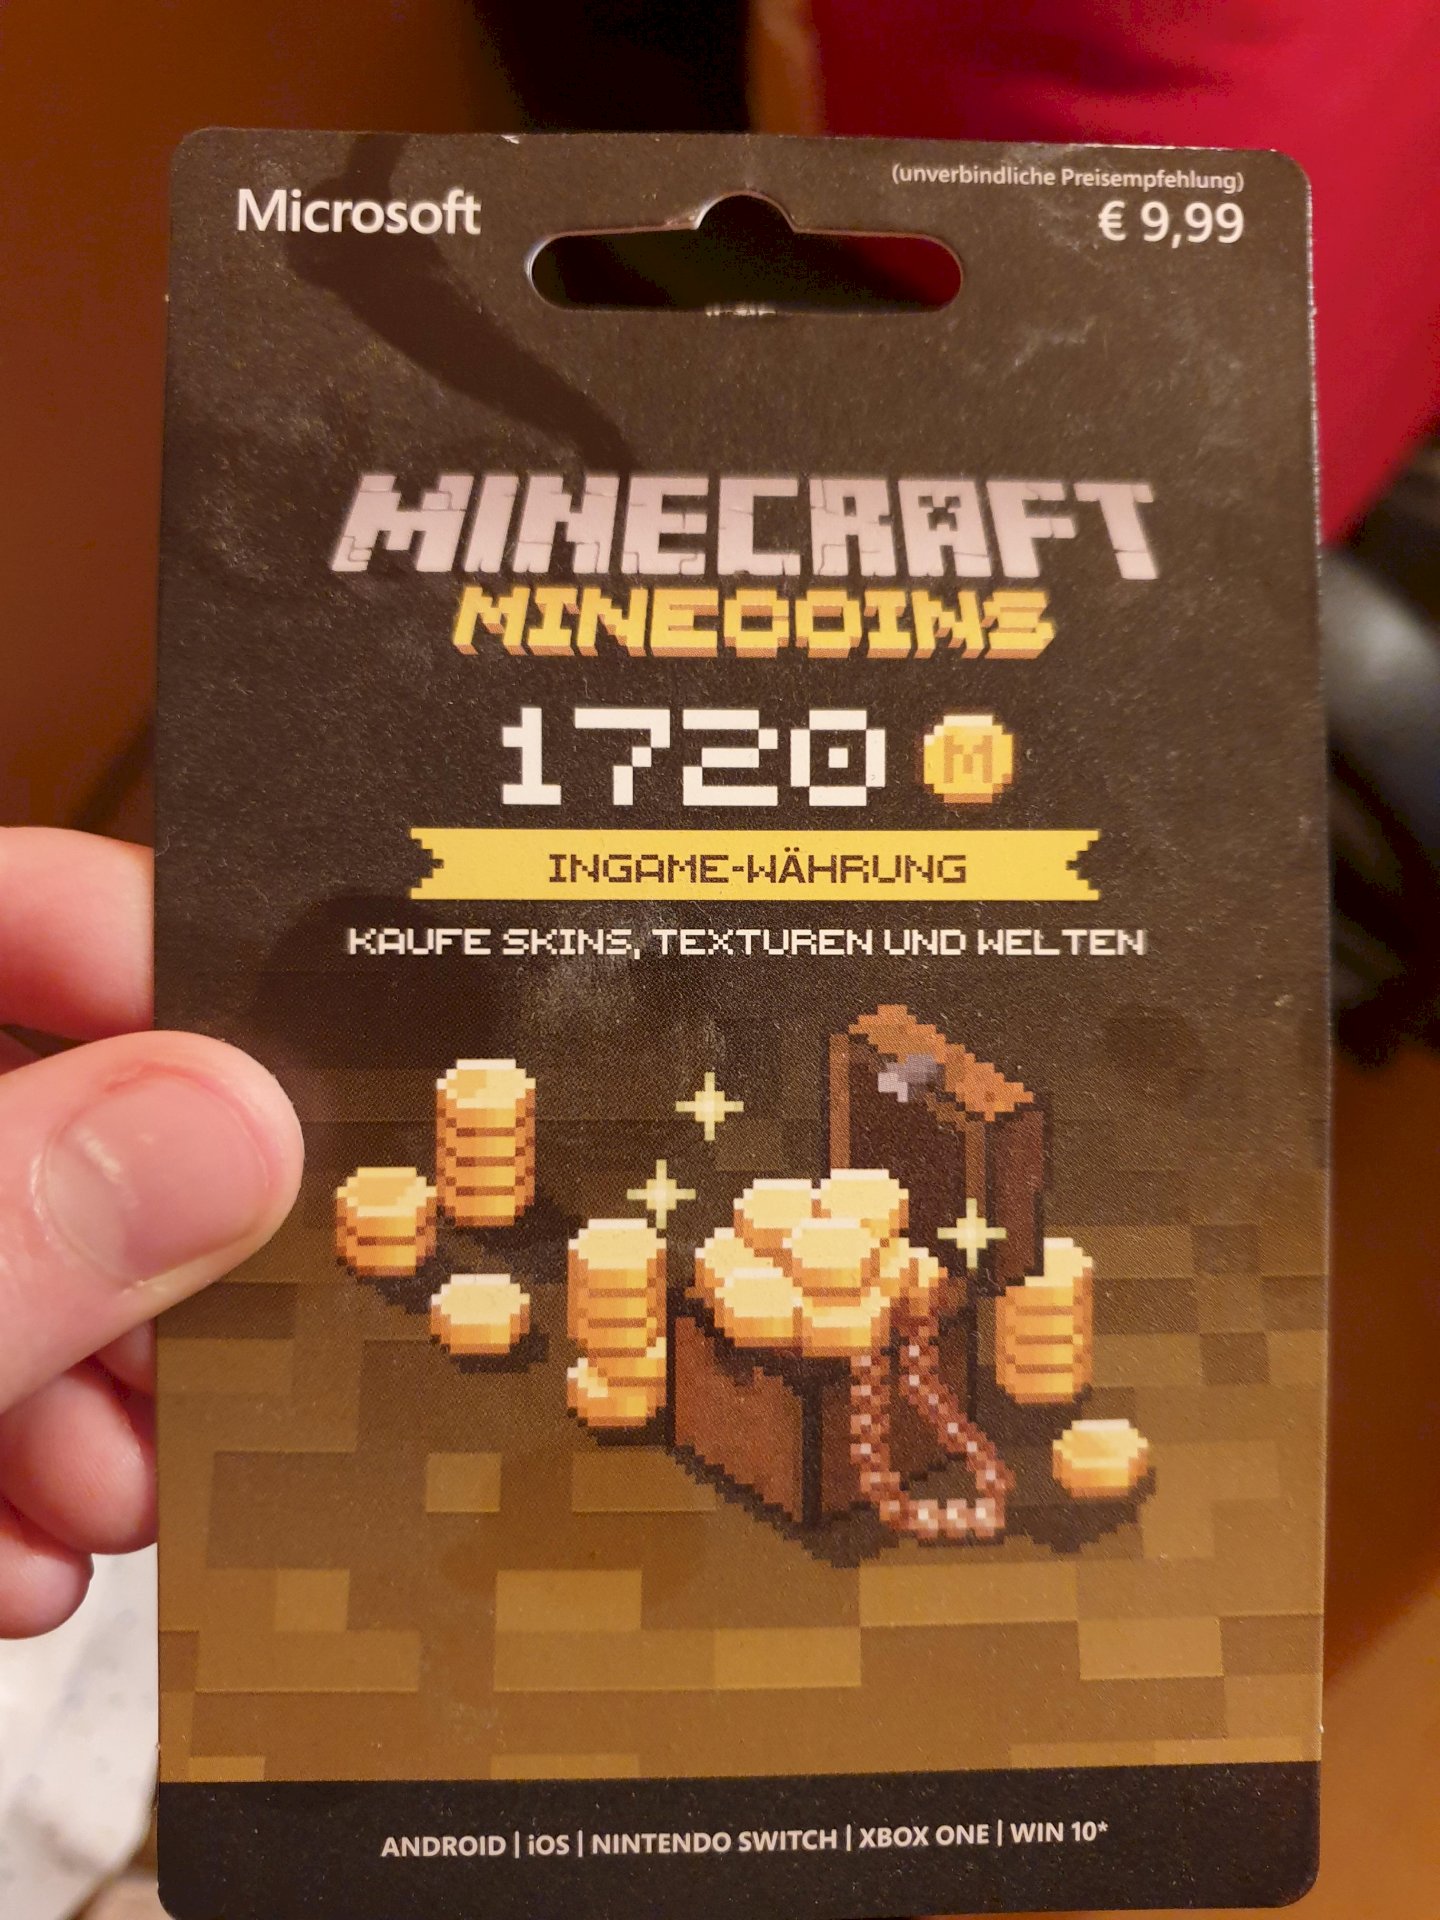 You can get the Java Minecraft Edition via prepaid cards